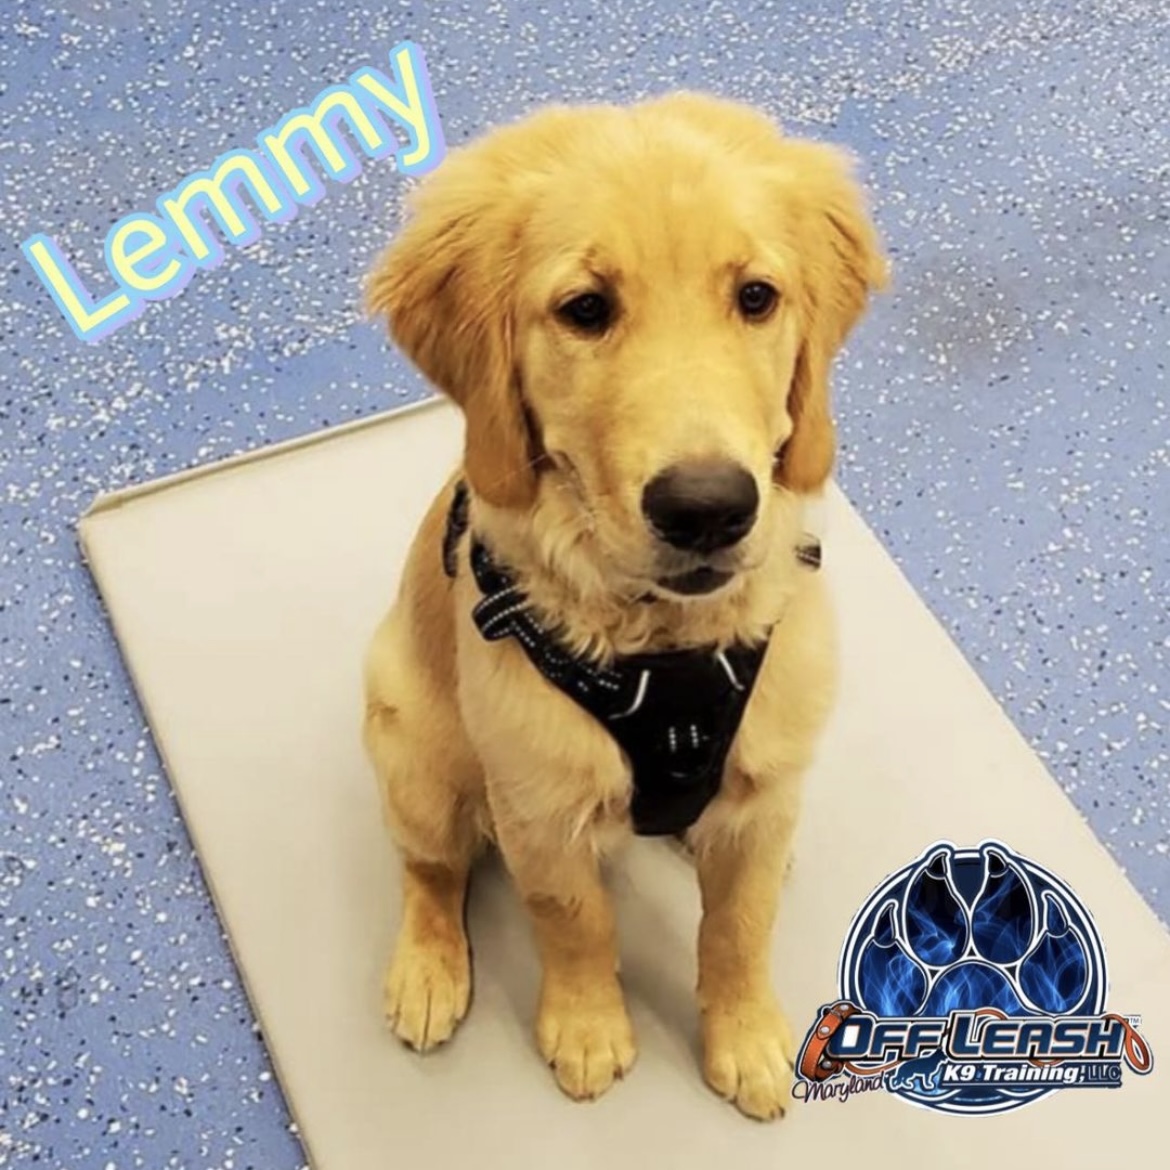 Puppy named Lemmy that completed our puppy obedience training program